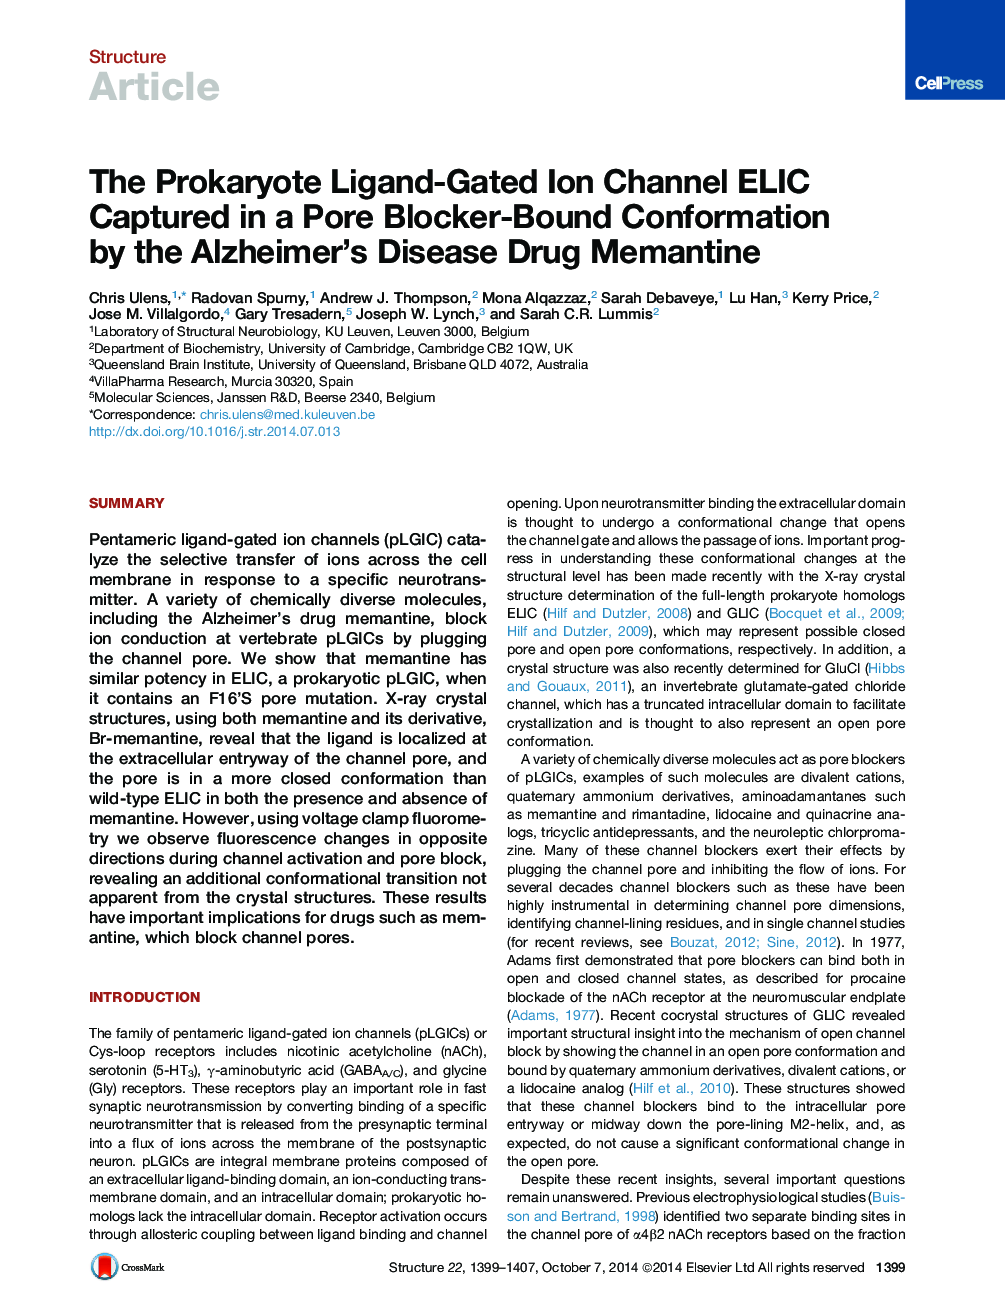 The Prokaryote Ligand-Gated Ion Channel ELIC Captured in a Pore Blocker-Bound Conformation by the Alzheimer’s Disease Drug Memantine